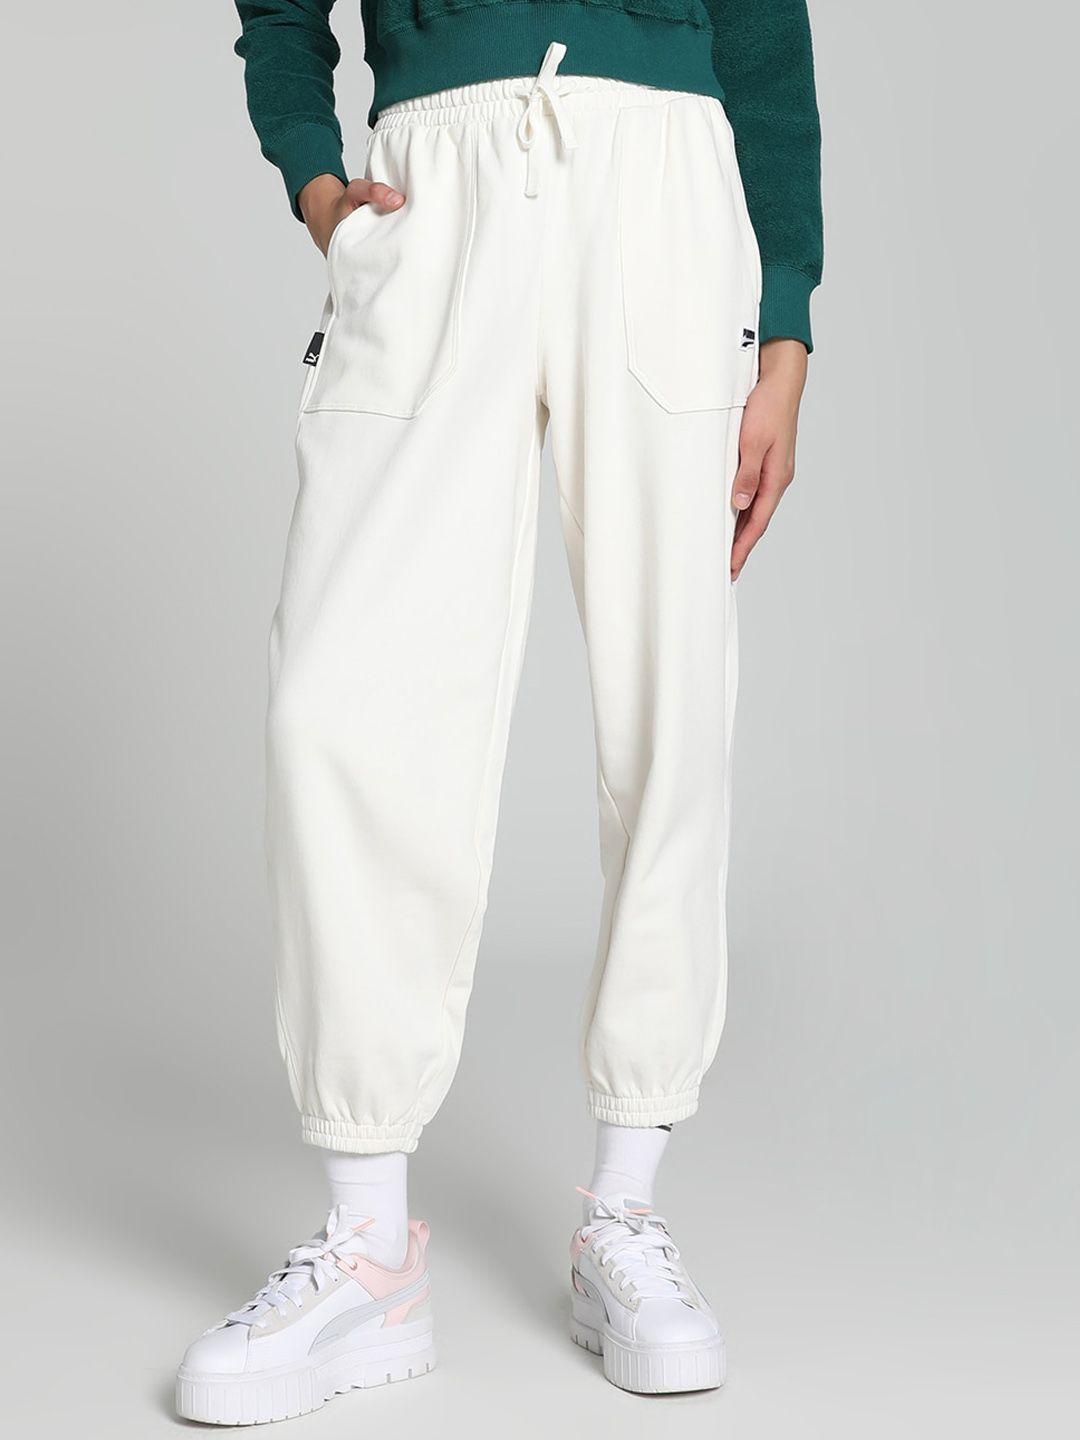 puma downtown sweatpants relaxed-fit mid-rise cotton joggers